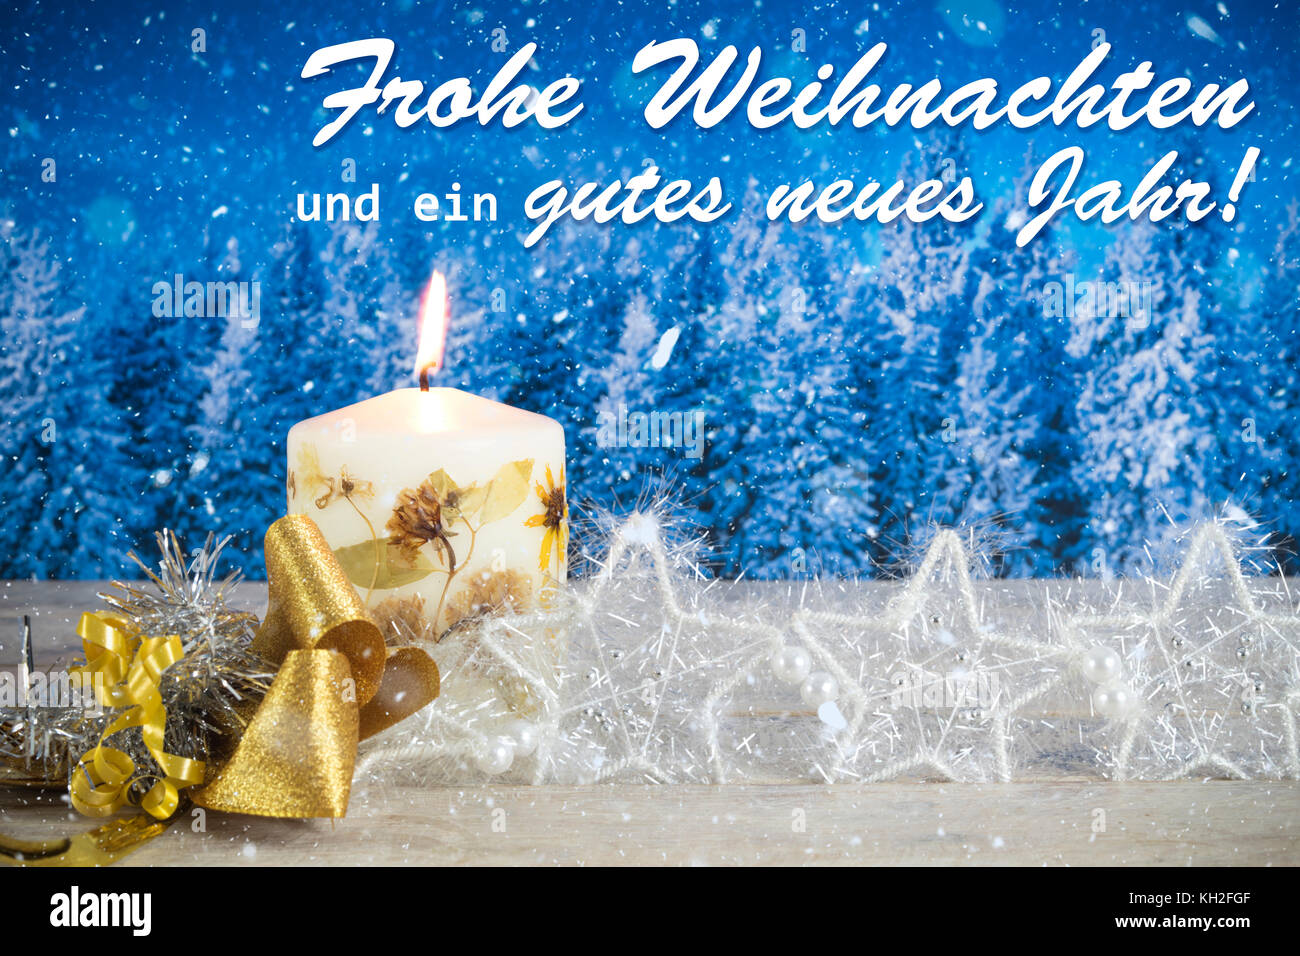 Christmas decoration with candle, golden bow, silver stars, with text in German 'Frohe Weihnachten und ein gutes neues Jahr' in a blue forest backgrou Stock Photo